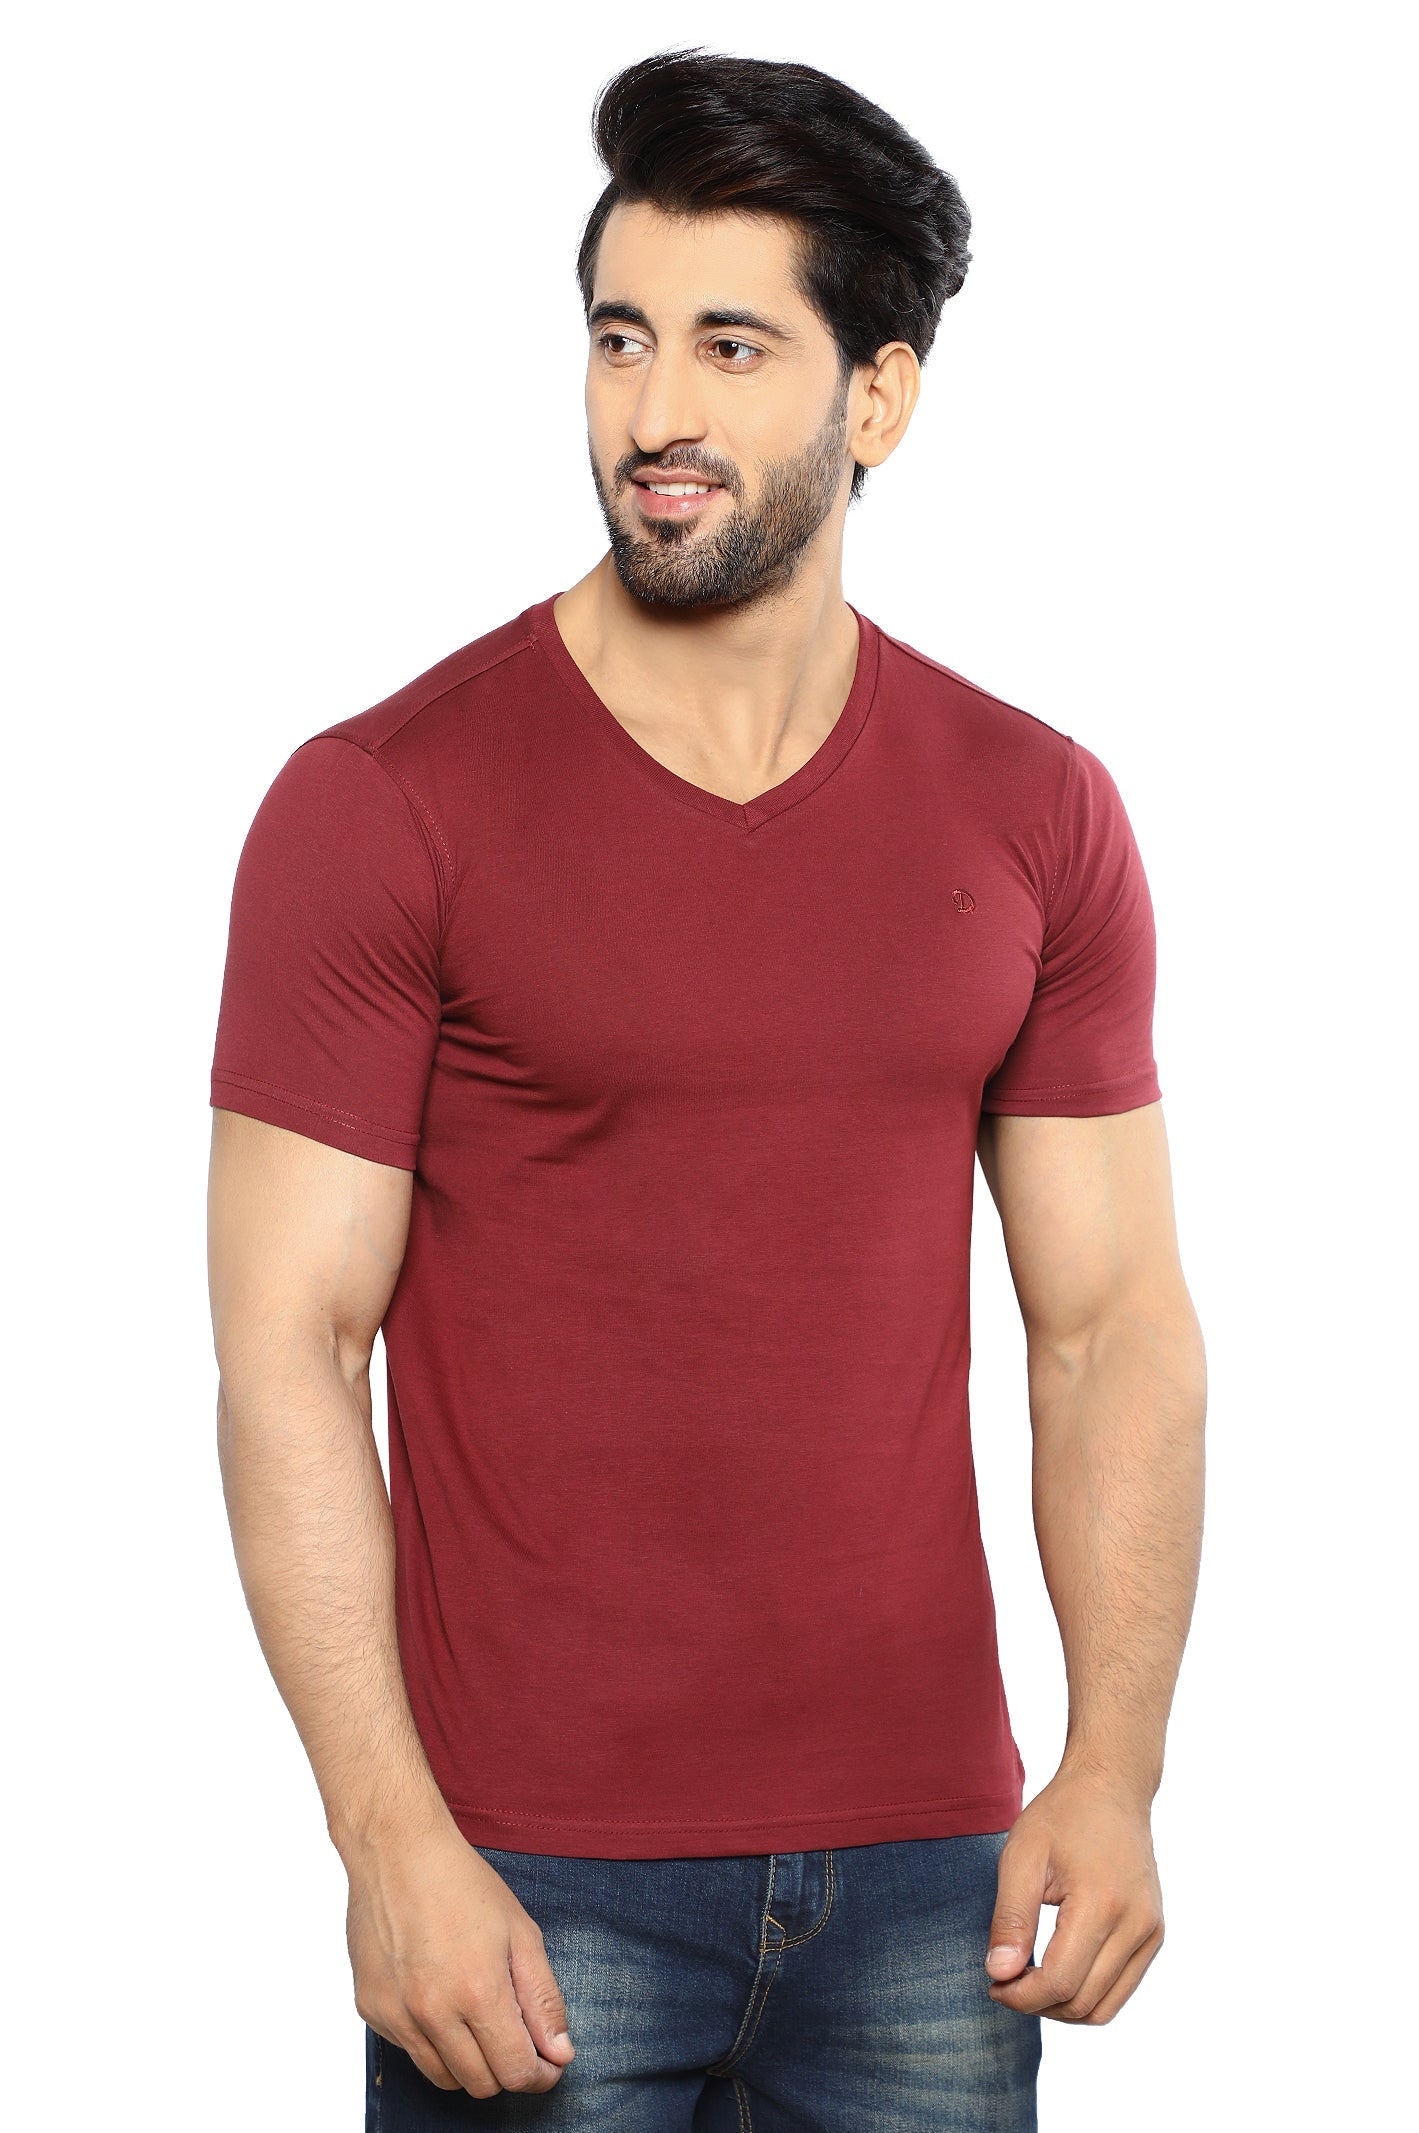 Diners Men's Round Neck T-Shirt SKU: NA857-MAROON - Diners